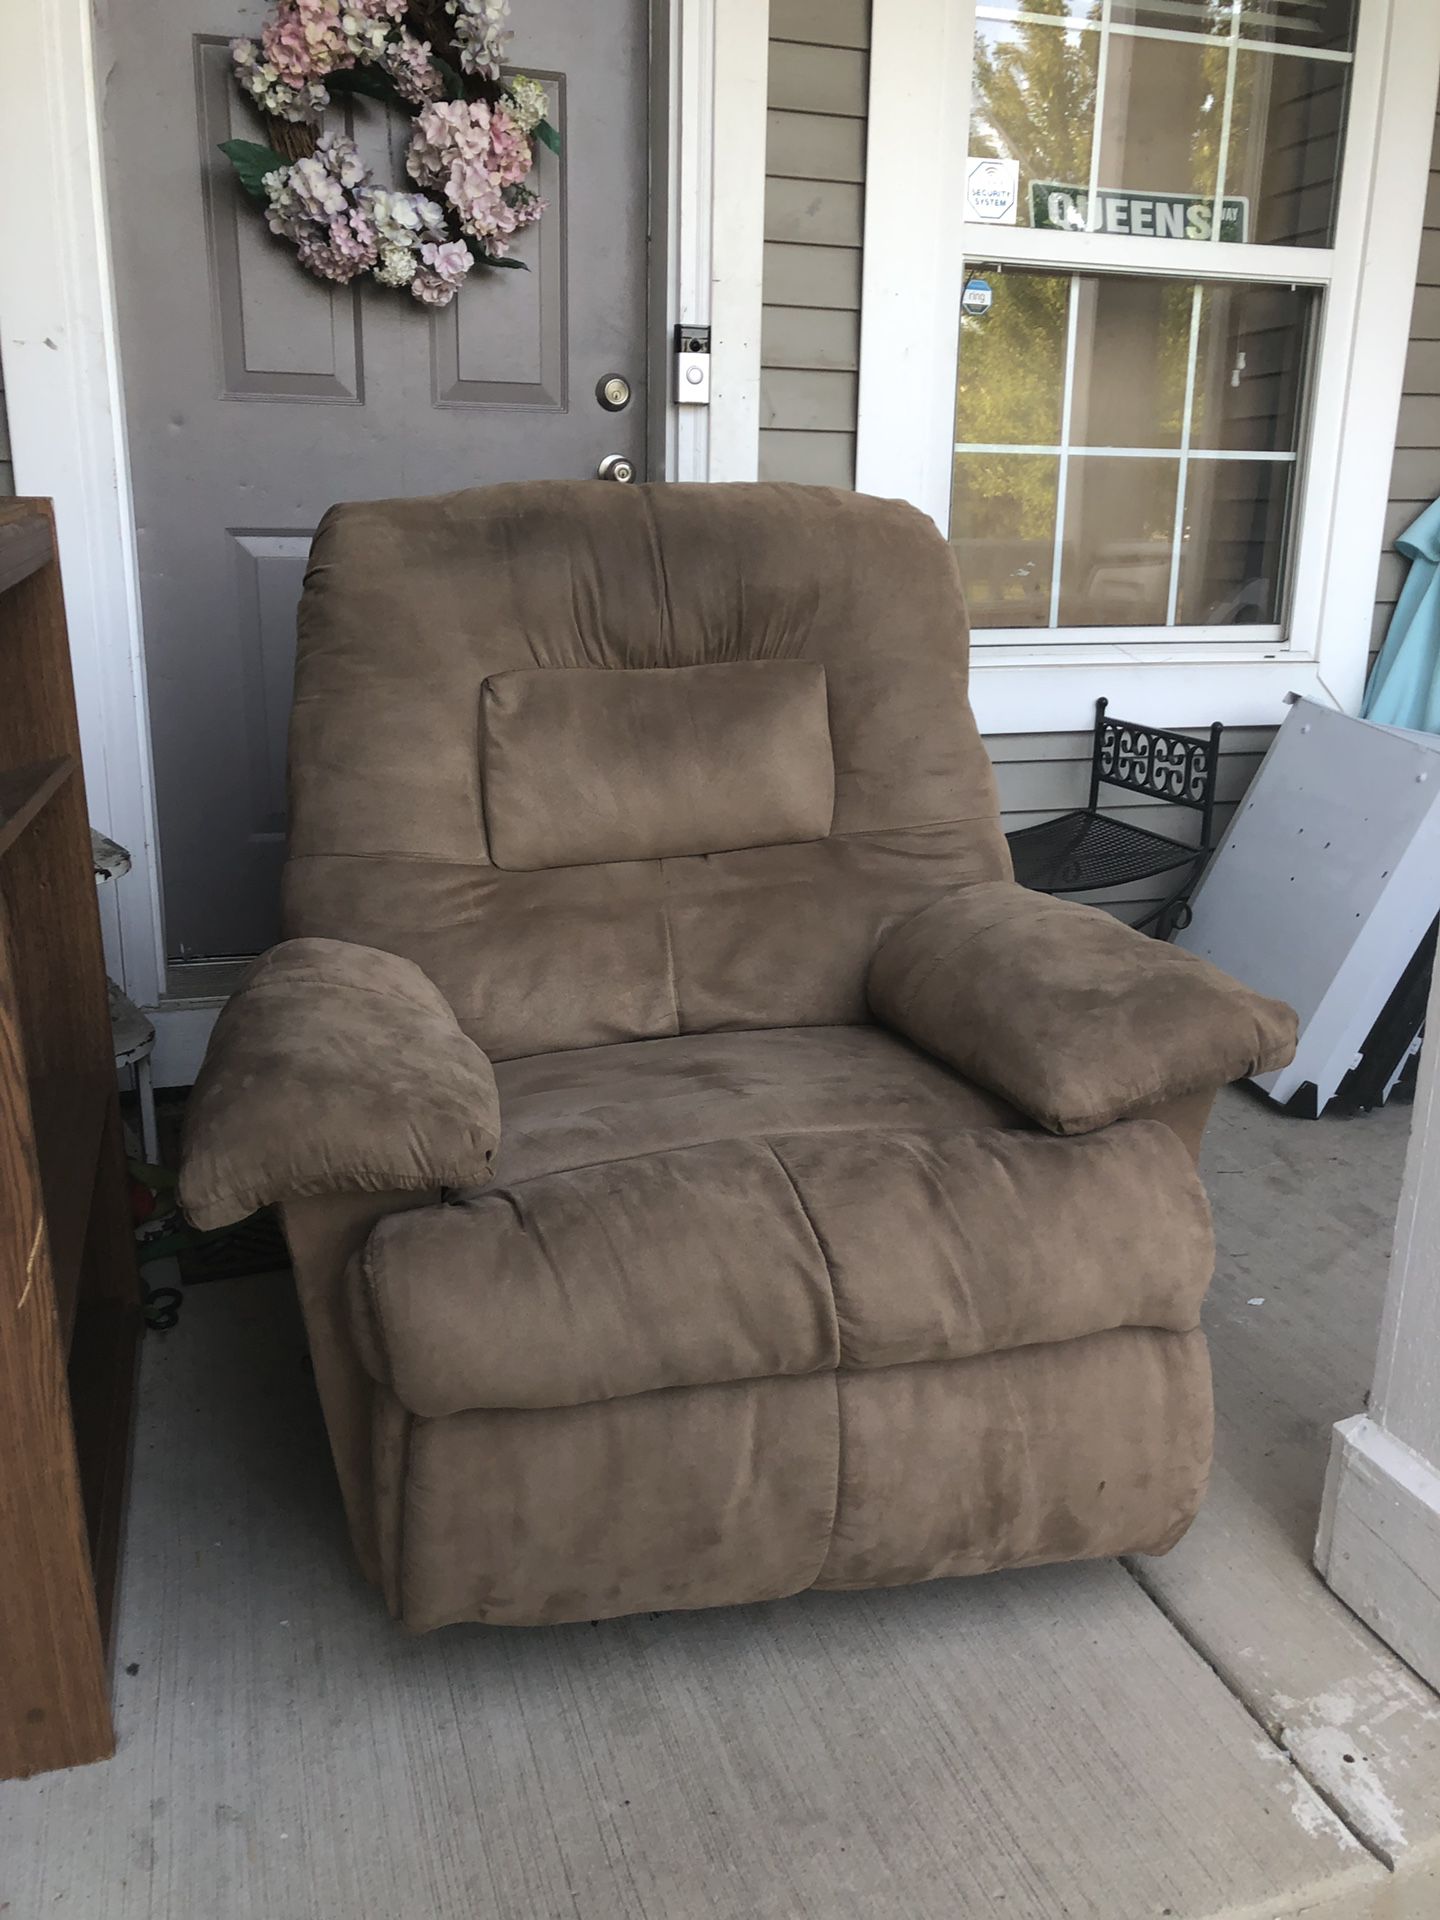 Lay-Z-Boy Reclining Oversized Large Plush Rocking Recliner Chair Brown Beige Holds 700lbs EXCELLENT CONDITION